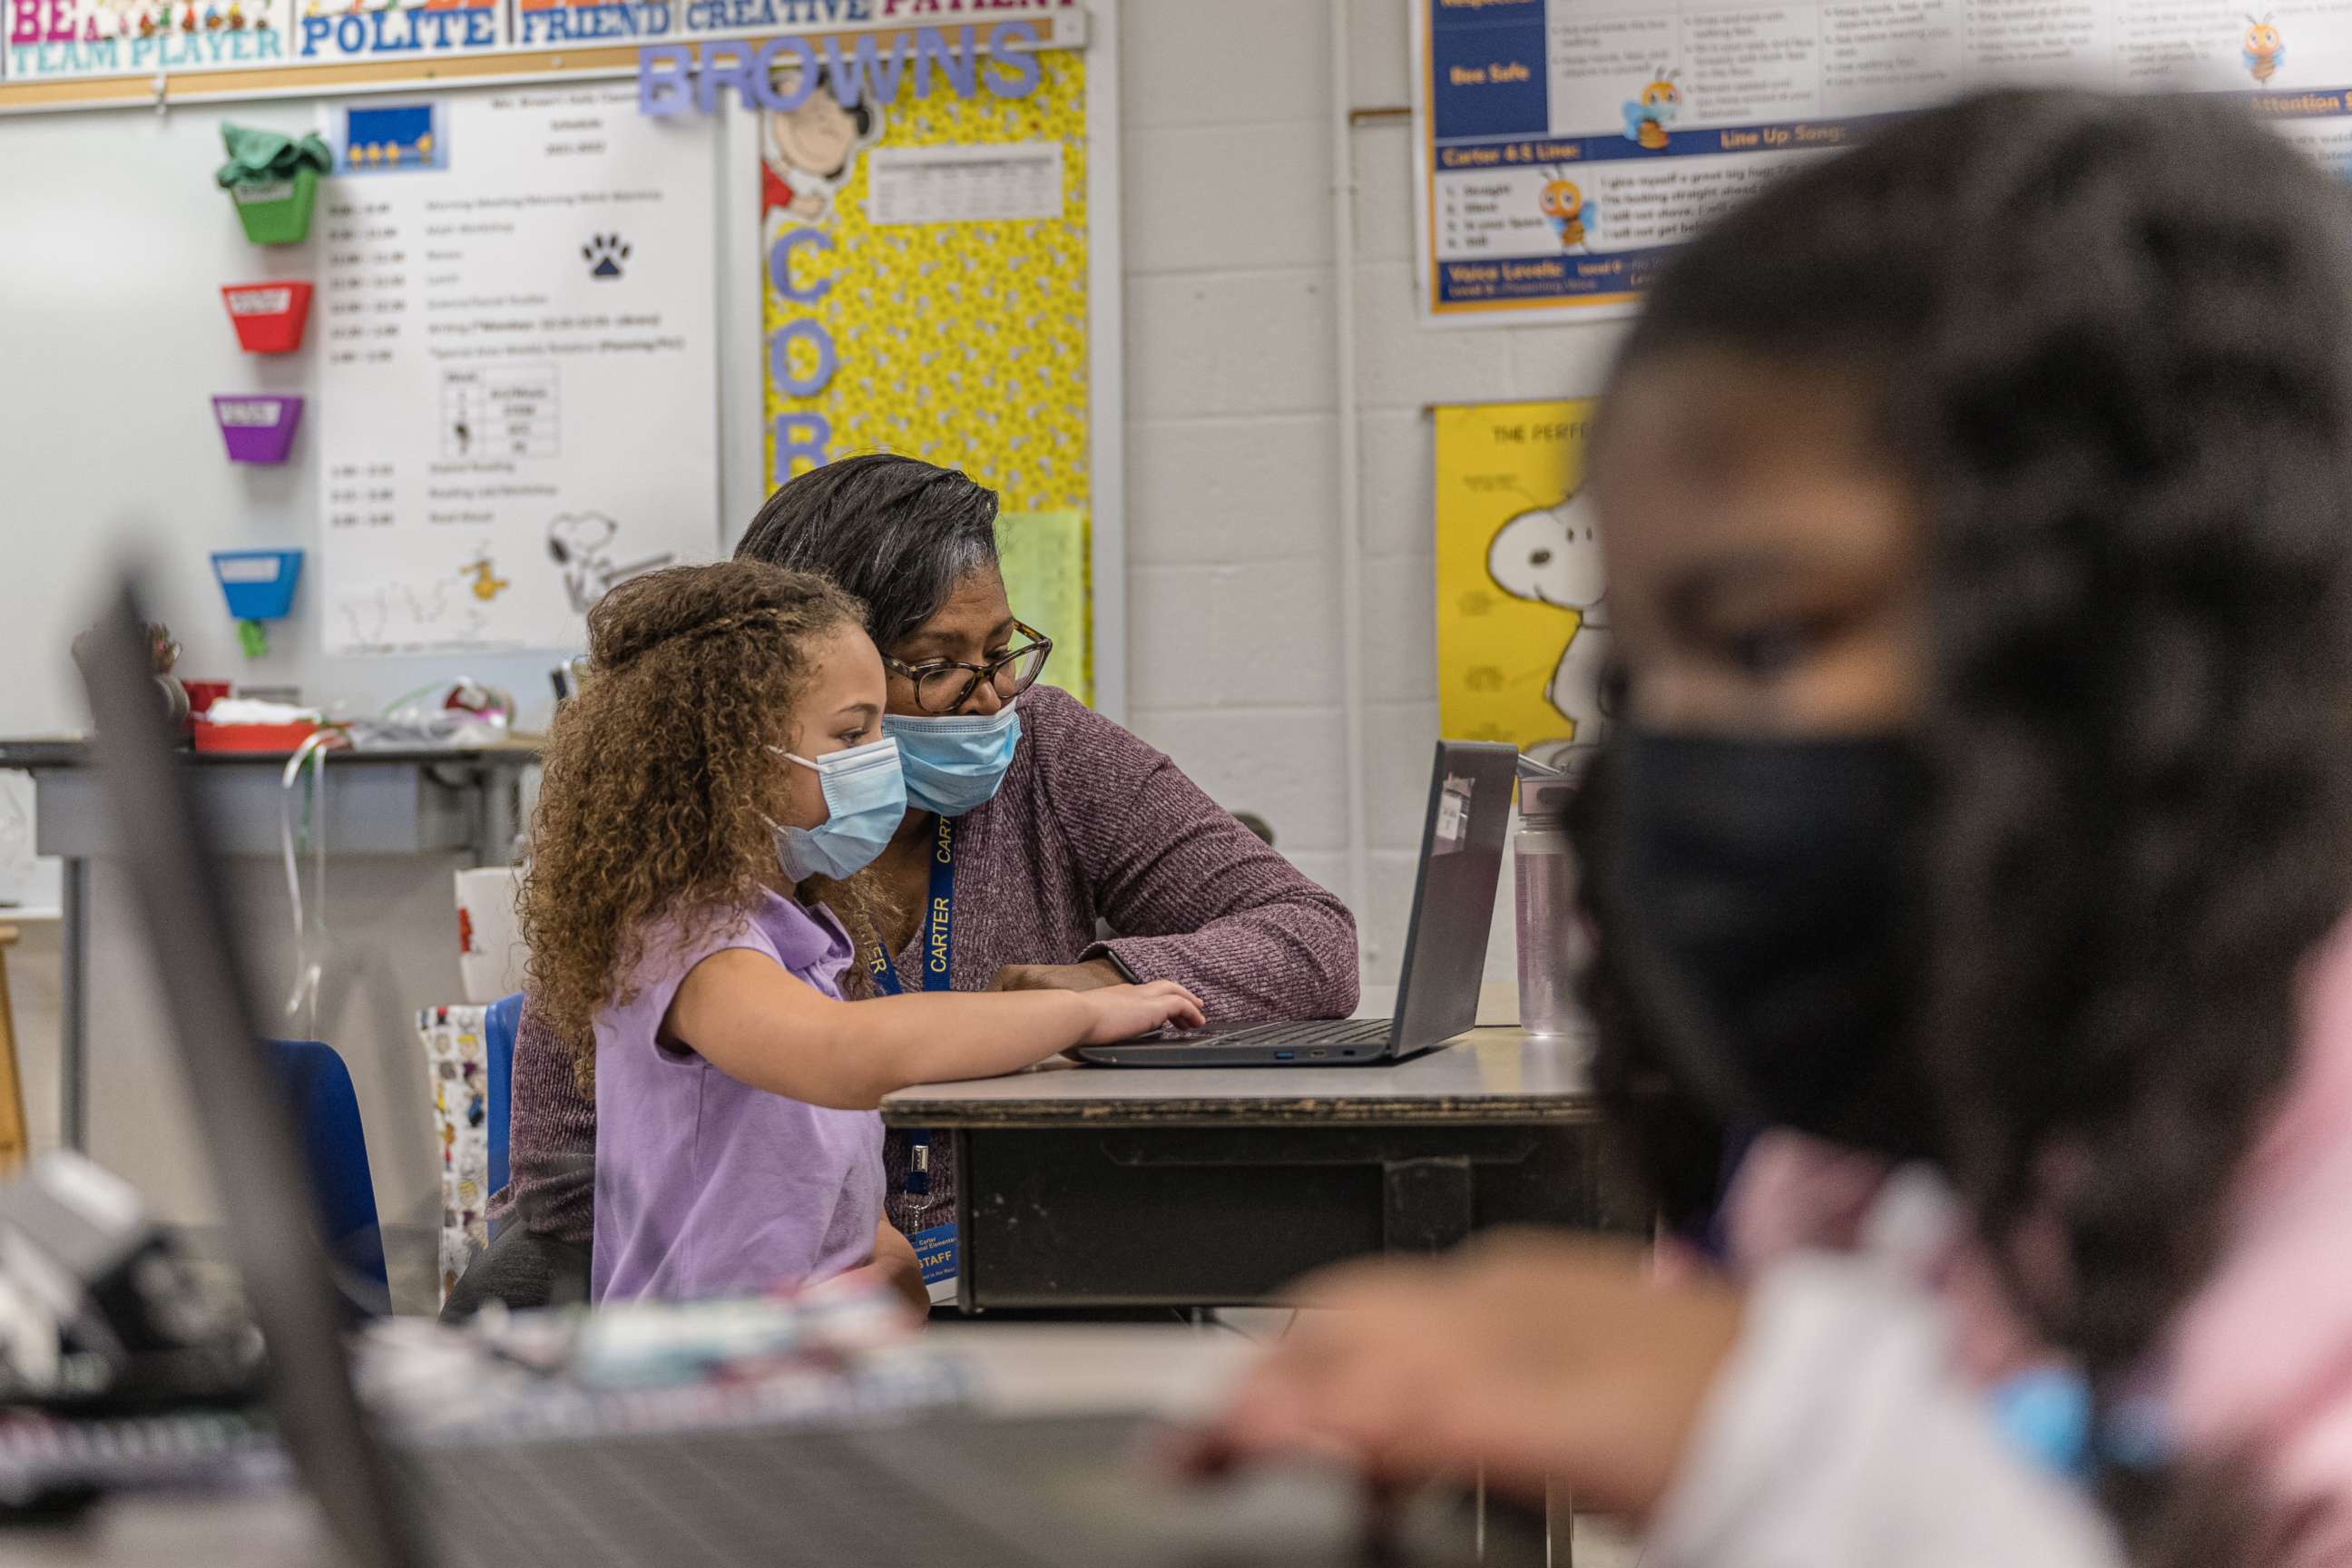 PHOTO: Nicole Brown, a second grade teacher, sits at a laptop computer with one of her students during a lesson in Louisville, Ky., Jan. 24, 2022.